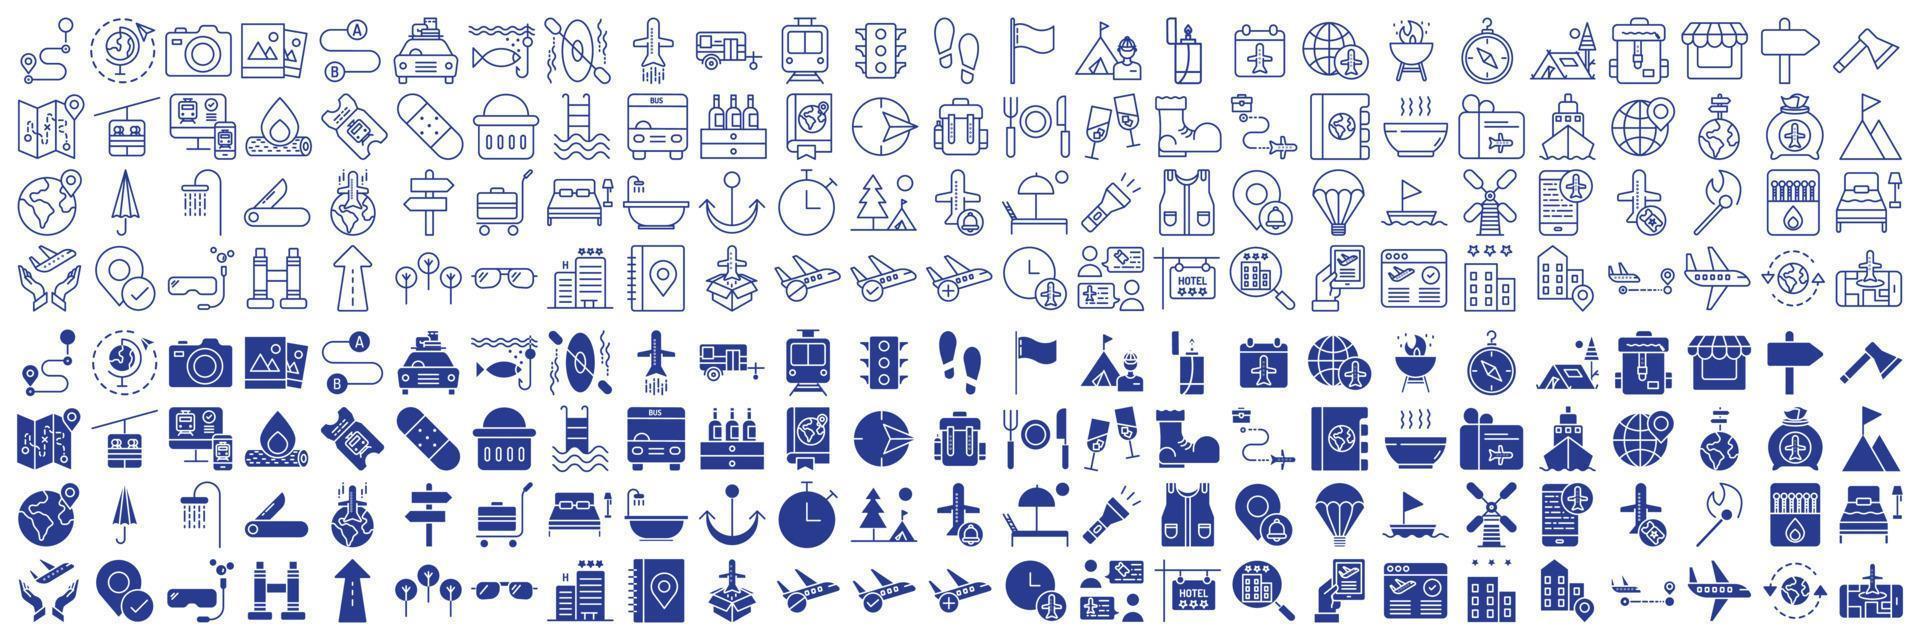 Collection of icons related to Travel and Holiday Vacation, including icons like Map, Flight, Luggage, Forest and more. vector illustrations, Pixel Perfect